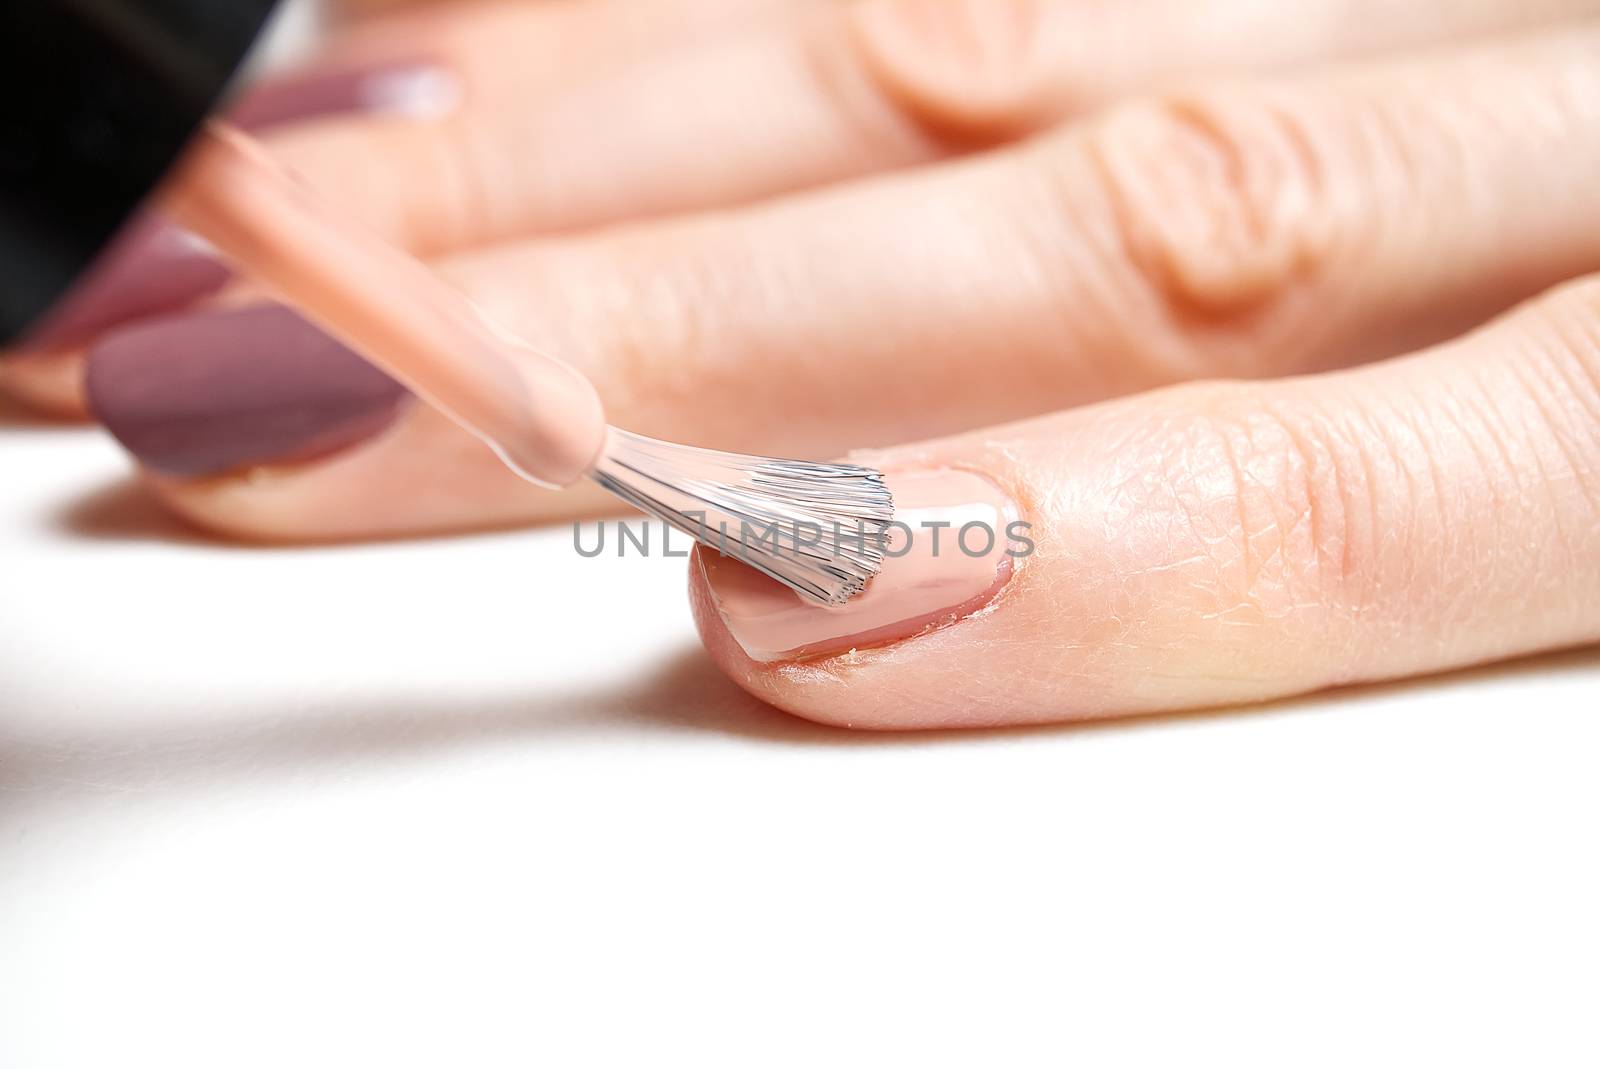 Woman applying nail polish. Beautiful nails. Woman applying polish on nails at home. Pastel nail polish on fingernail. Beauty treatment and hand care concept. manicure procedures yourself at home by PhotoTime